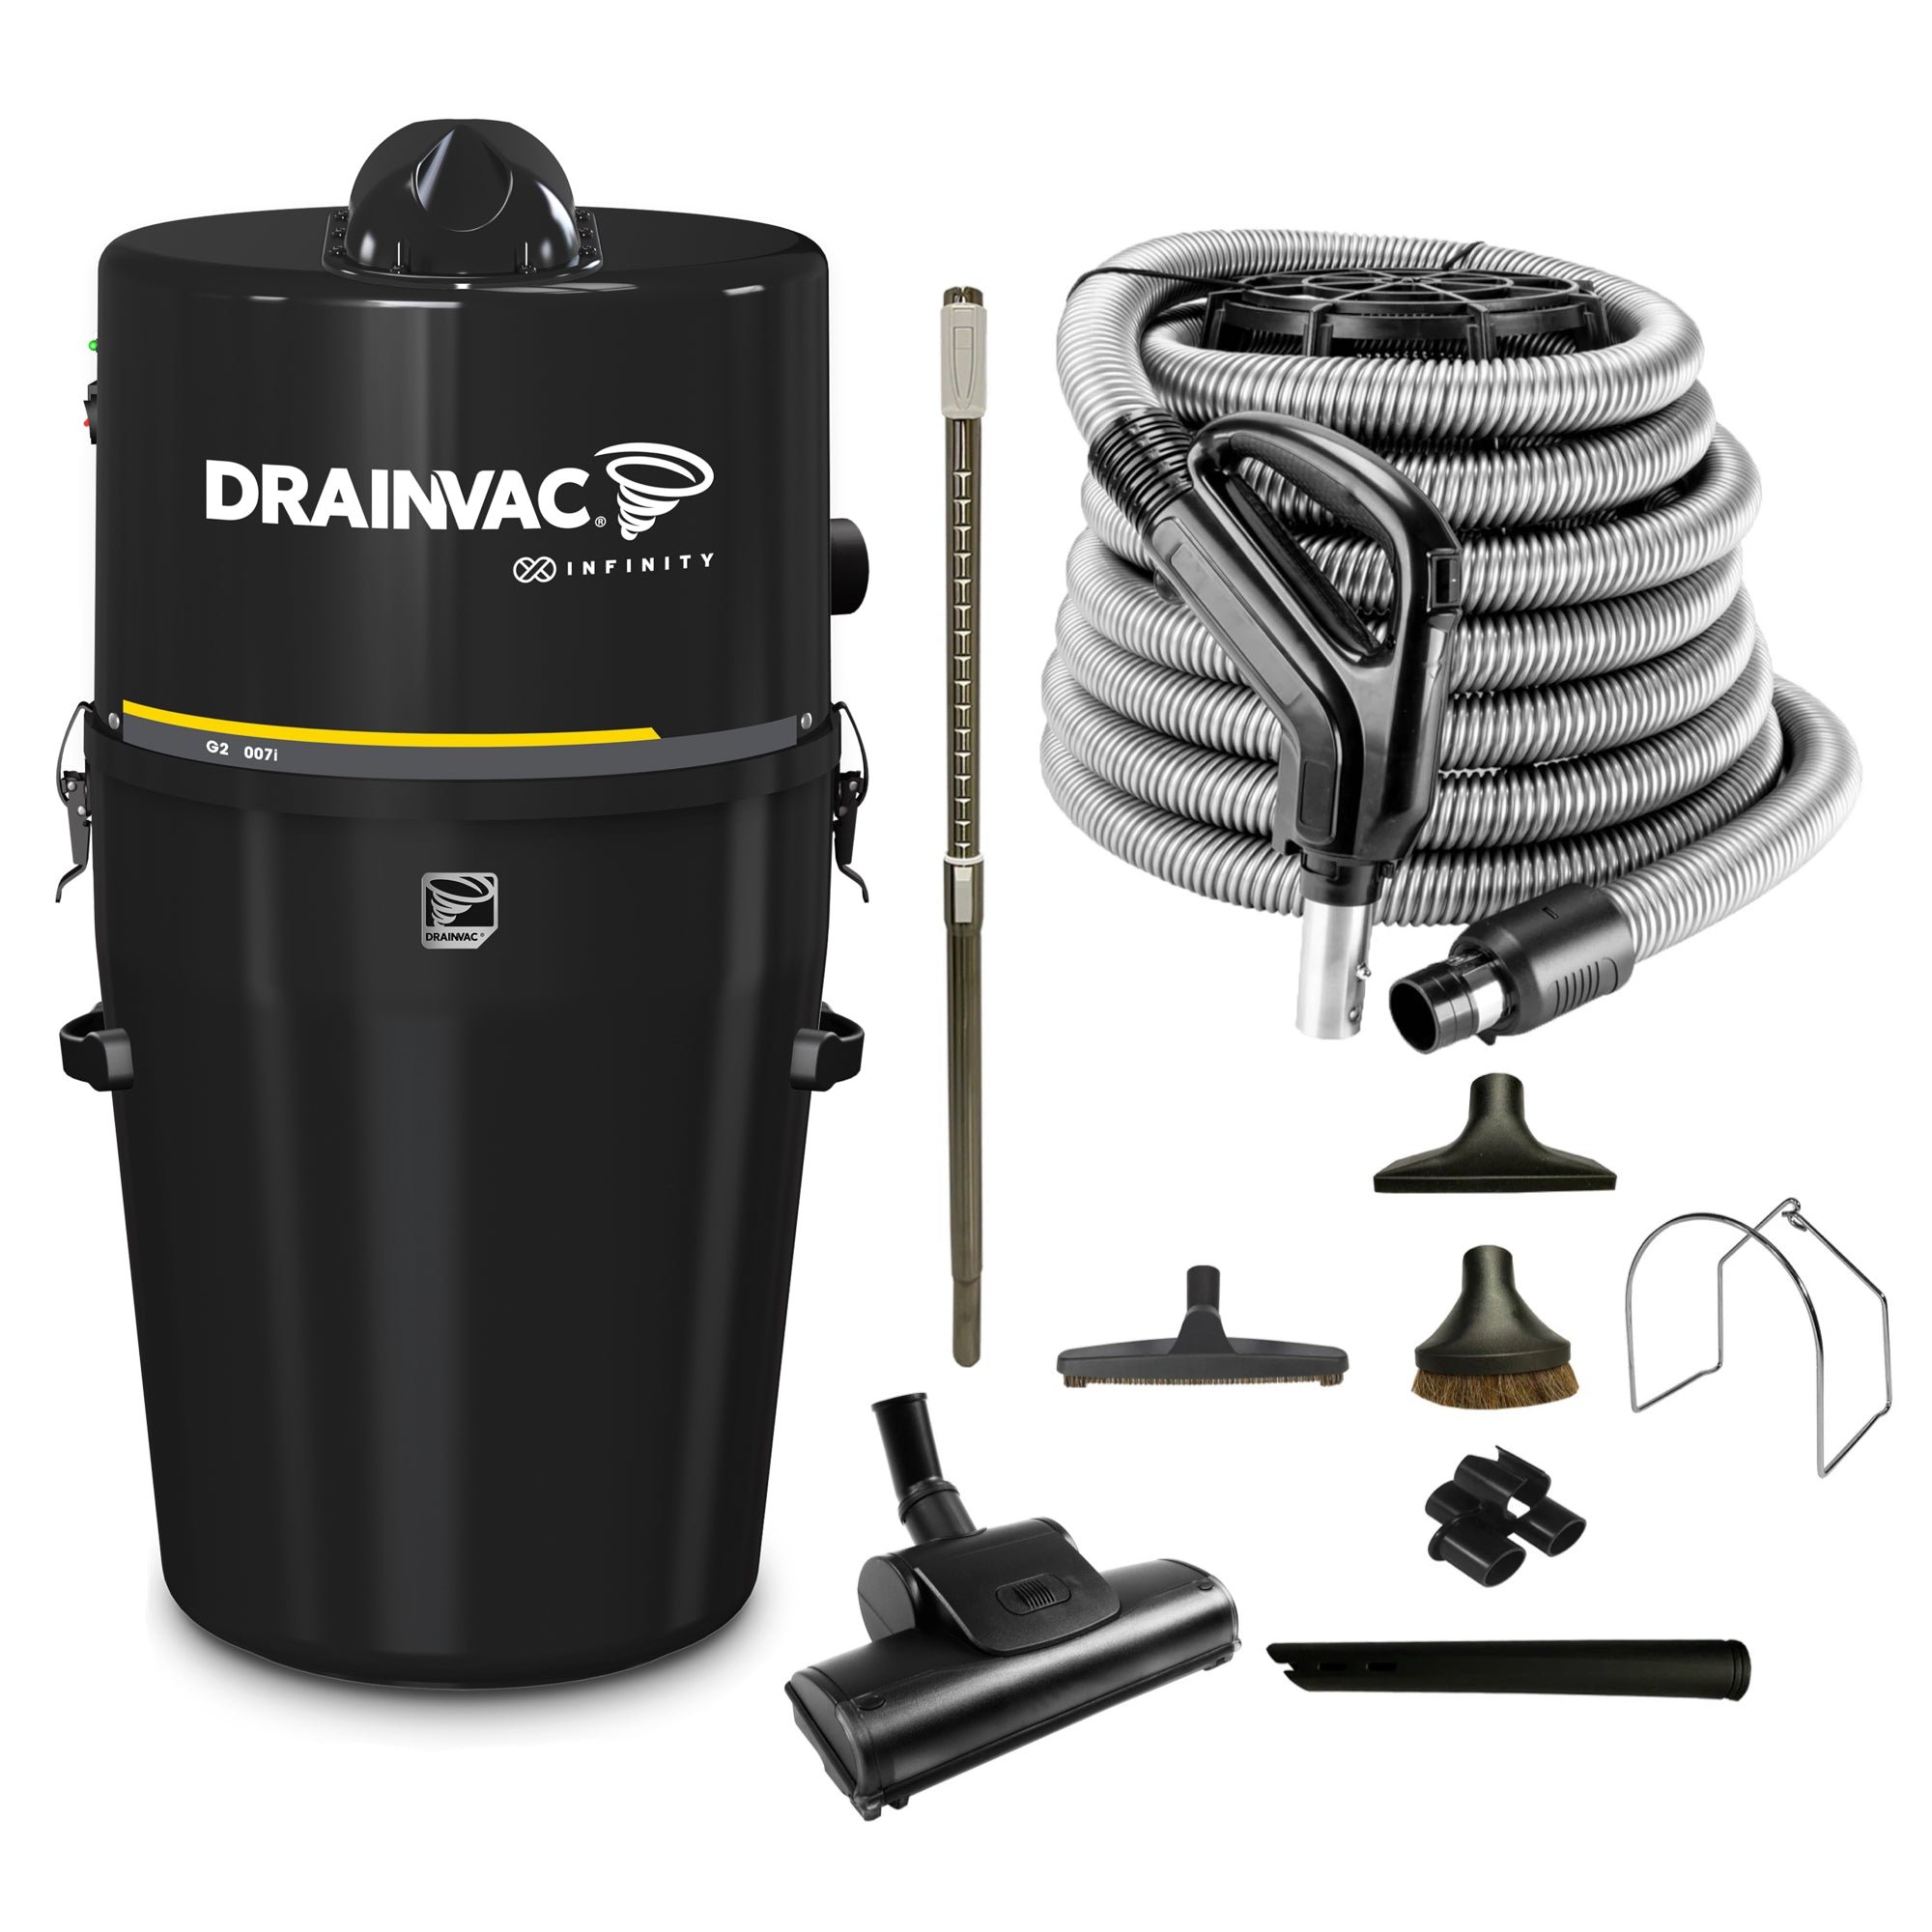 DrainVac G2-007i Infinity Central Vacuum with Deluxe Air Package